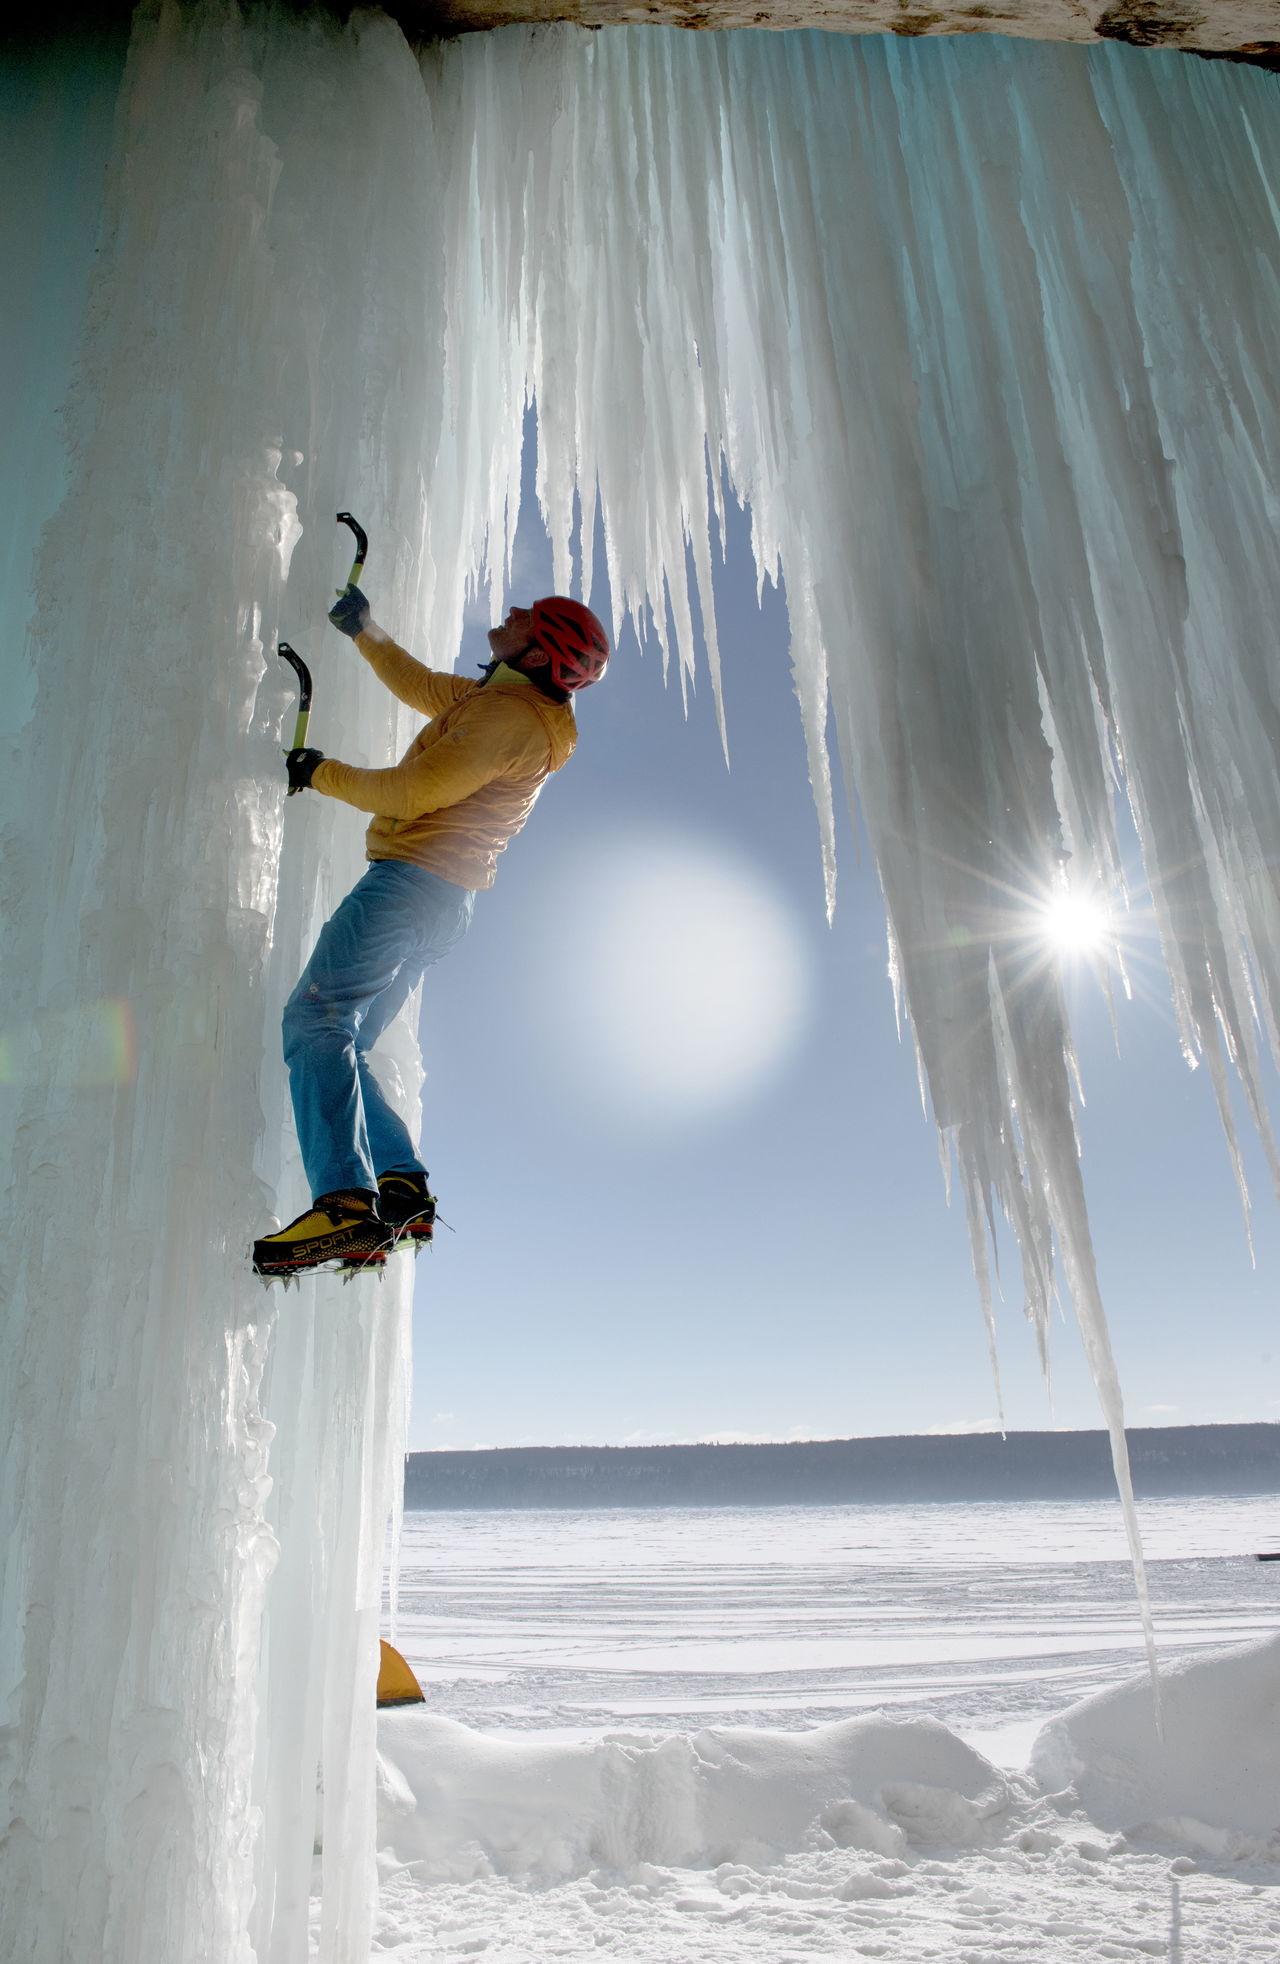 Conrad Anker climbs at Pictured Lakes National Lakeshore on Lake Superior in Michigan. The film follows Anker, a well-known climber, his stepson and a family friend.